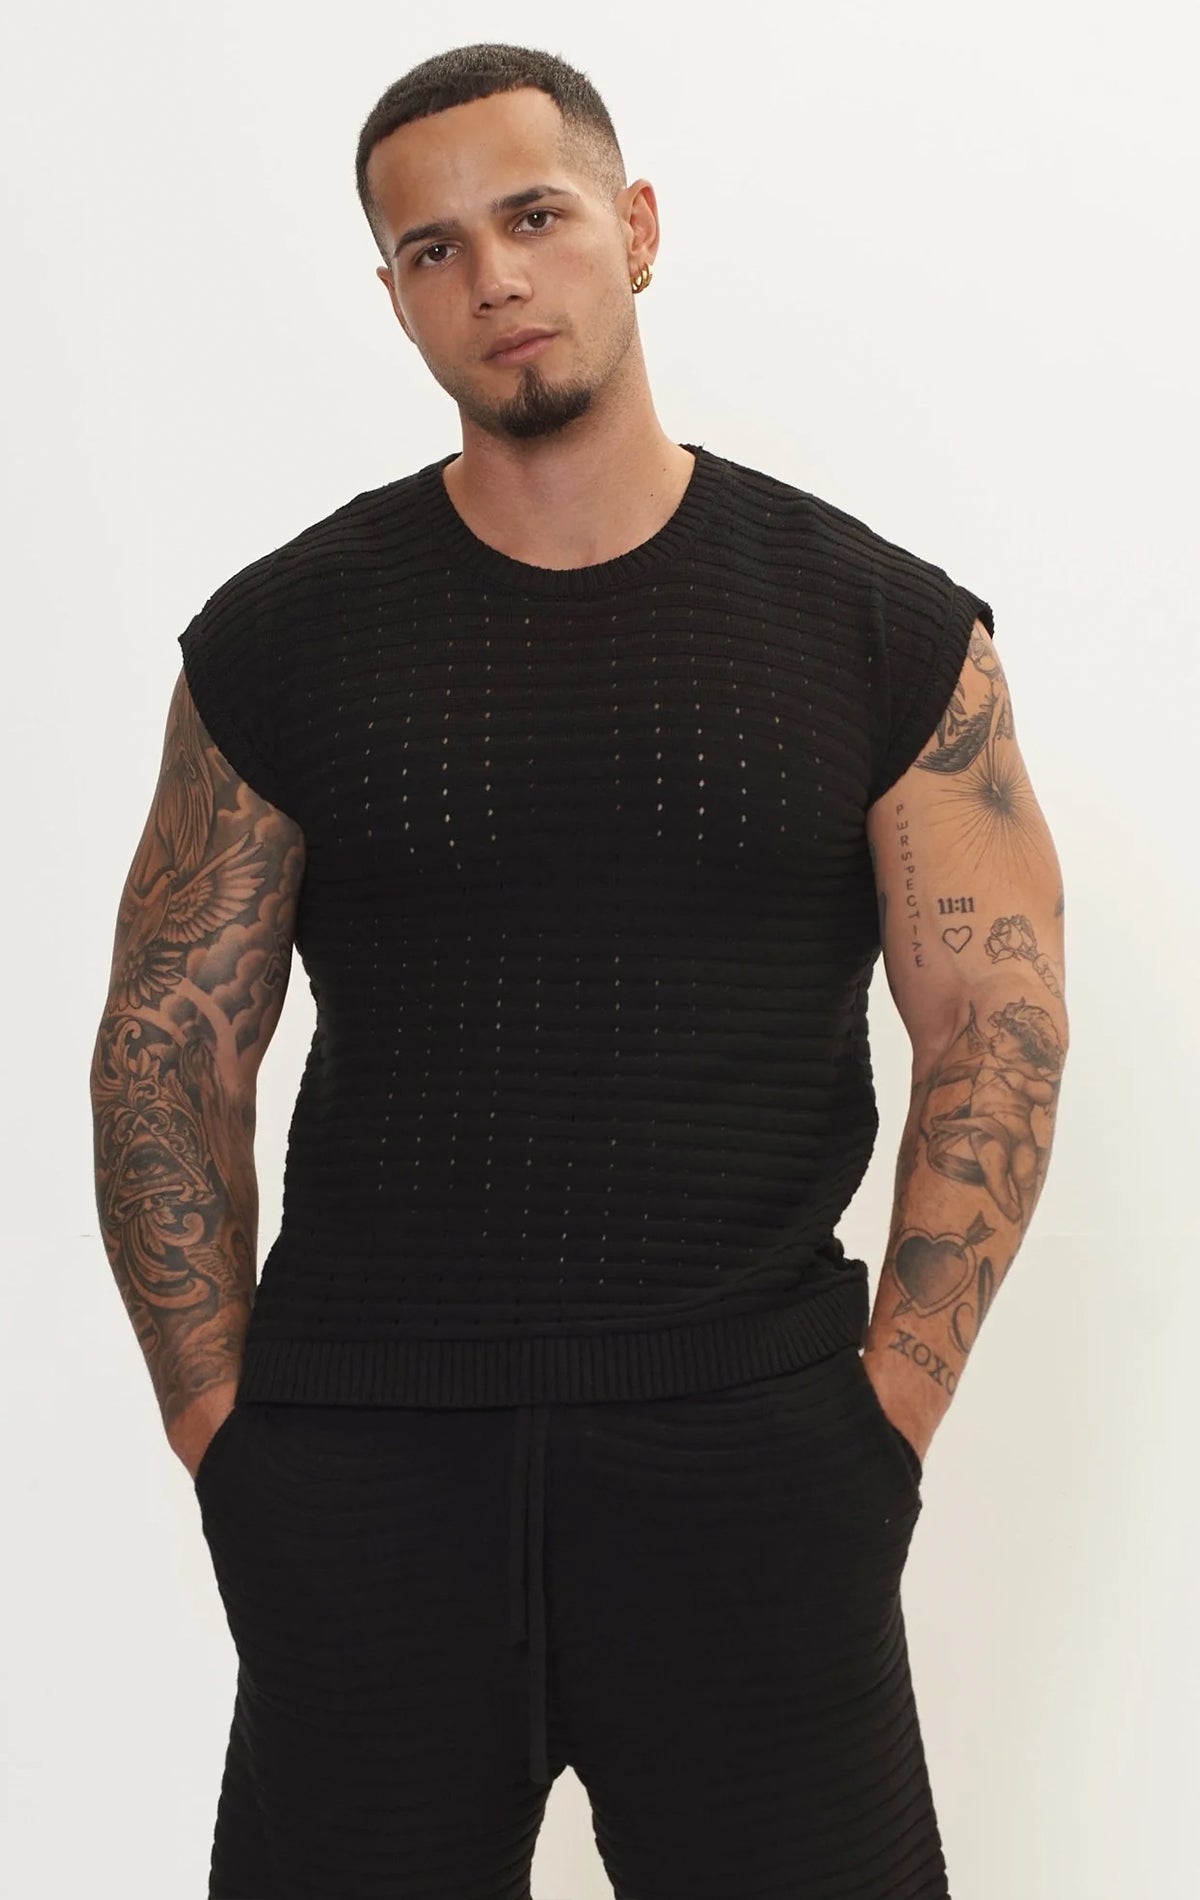 Men's black eyelet short sleeve knit top and shorts set in a variety of colors. The set is made from a soft and breathable knit fabric (50% viscose, 50% polyamide) and features a relaxed-fit top with eyelet detailing on the short sleeves and comfortable shorts with an elastic waistband.